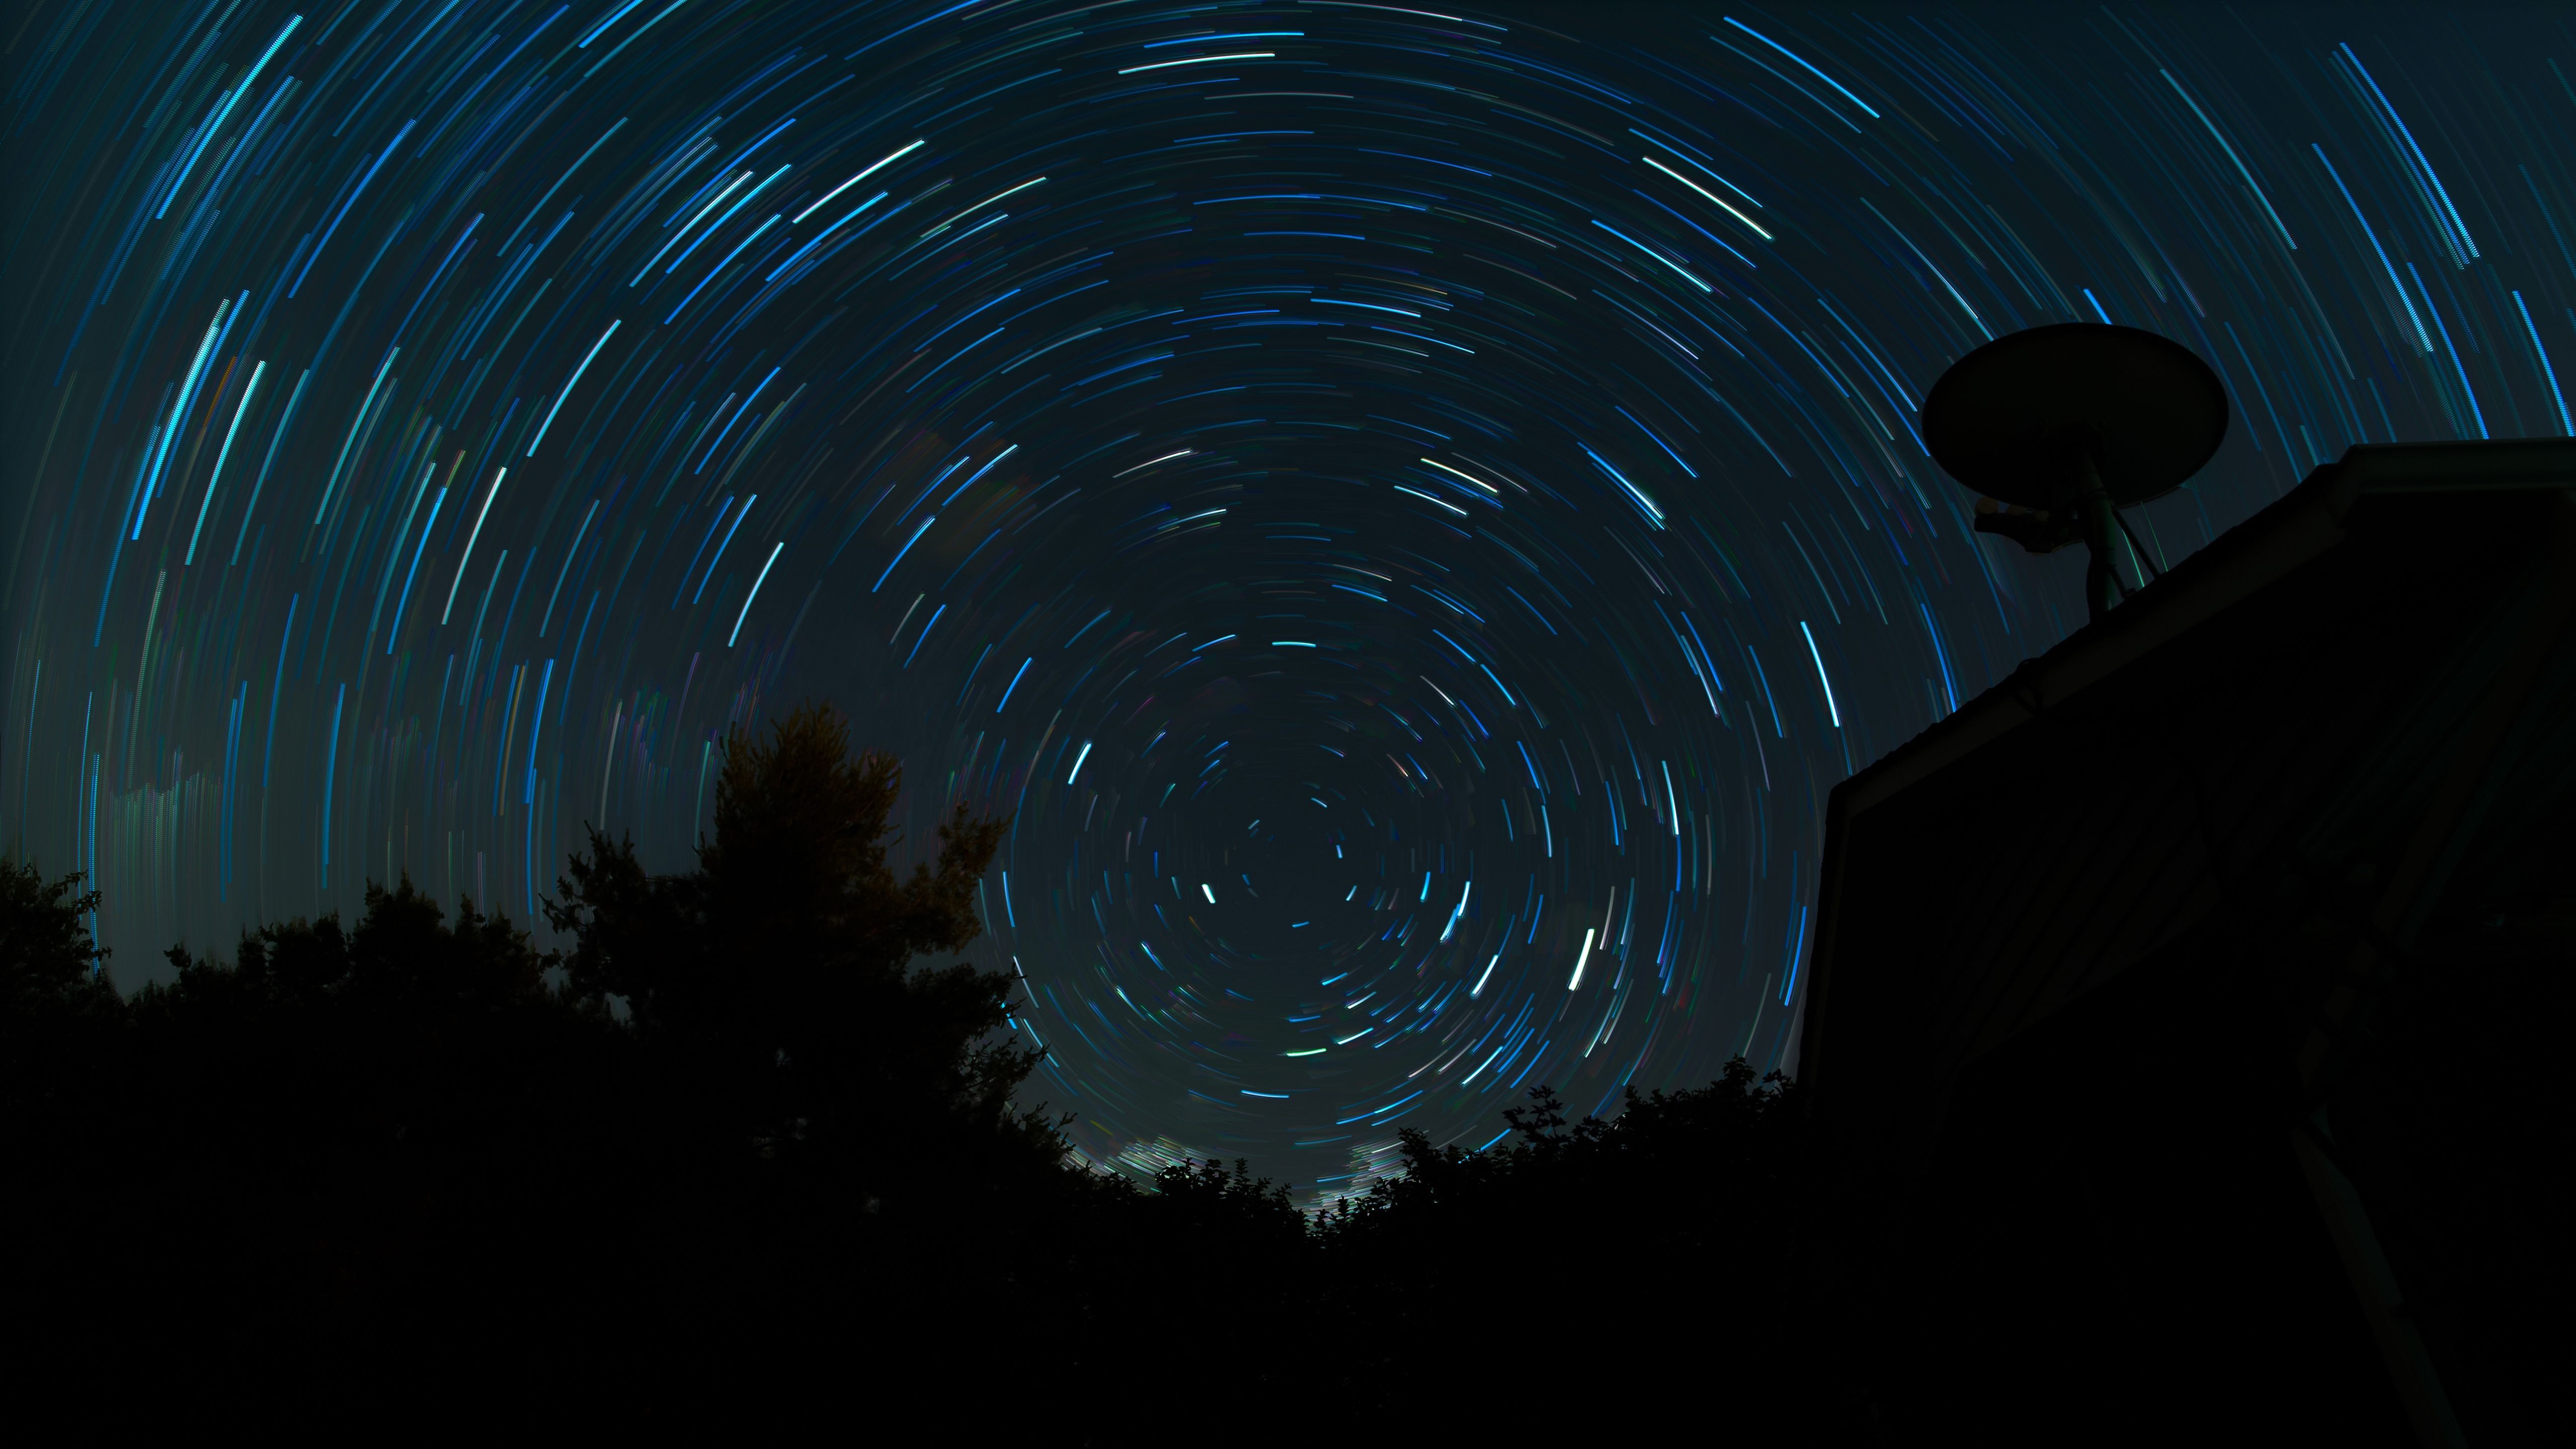 Wallpaper Weekends: Night Sky Time Lapse For Mac, IPad, IPhone, And Apple Watch